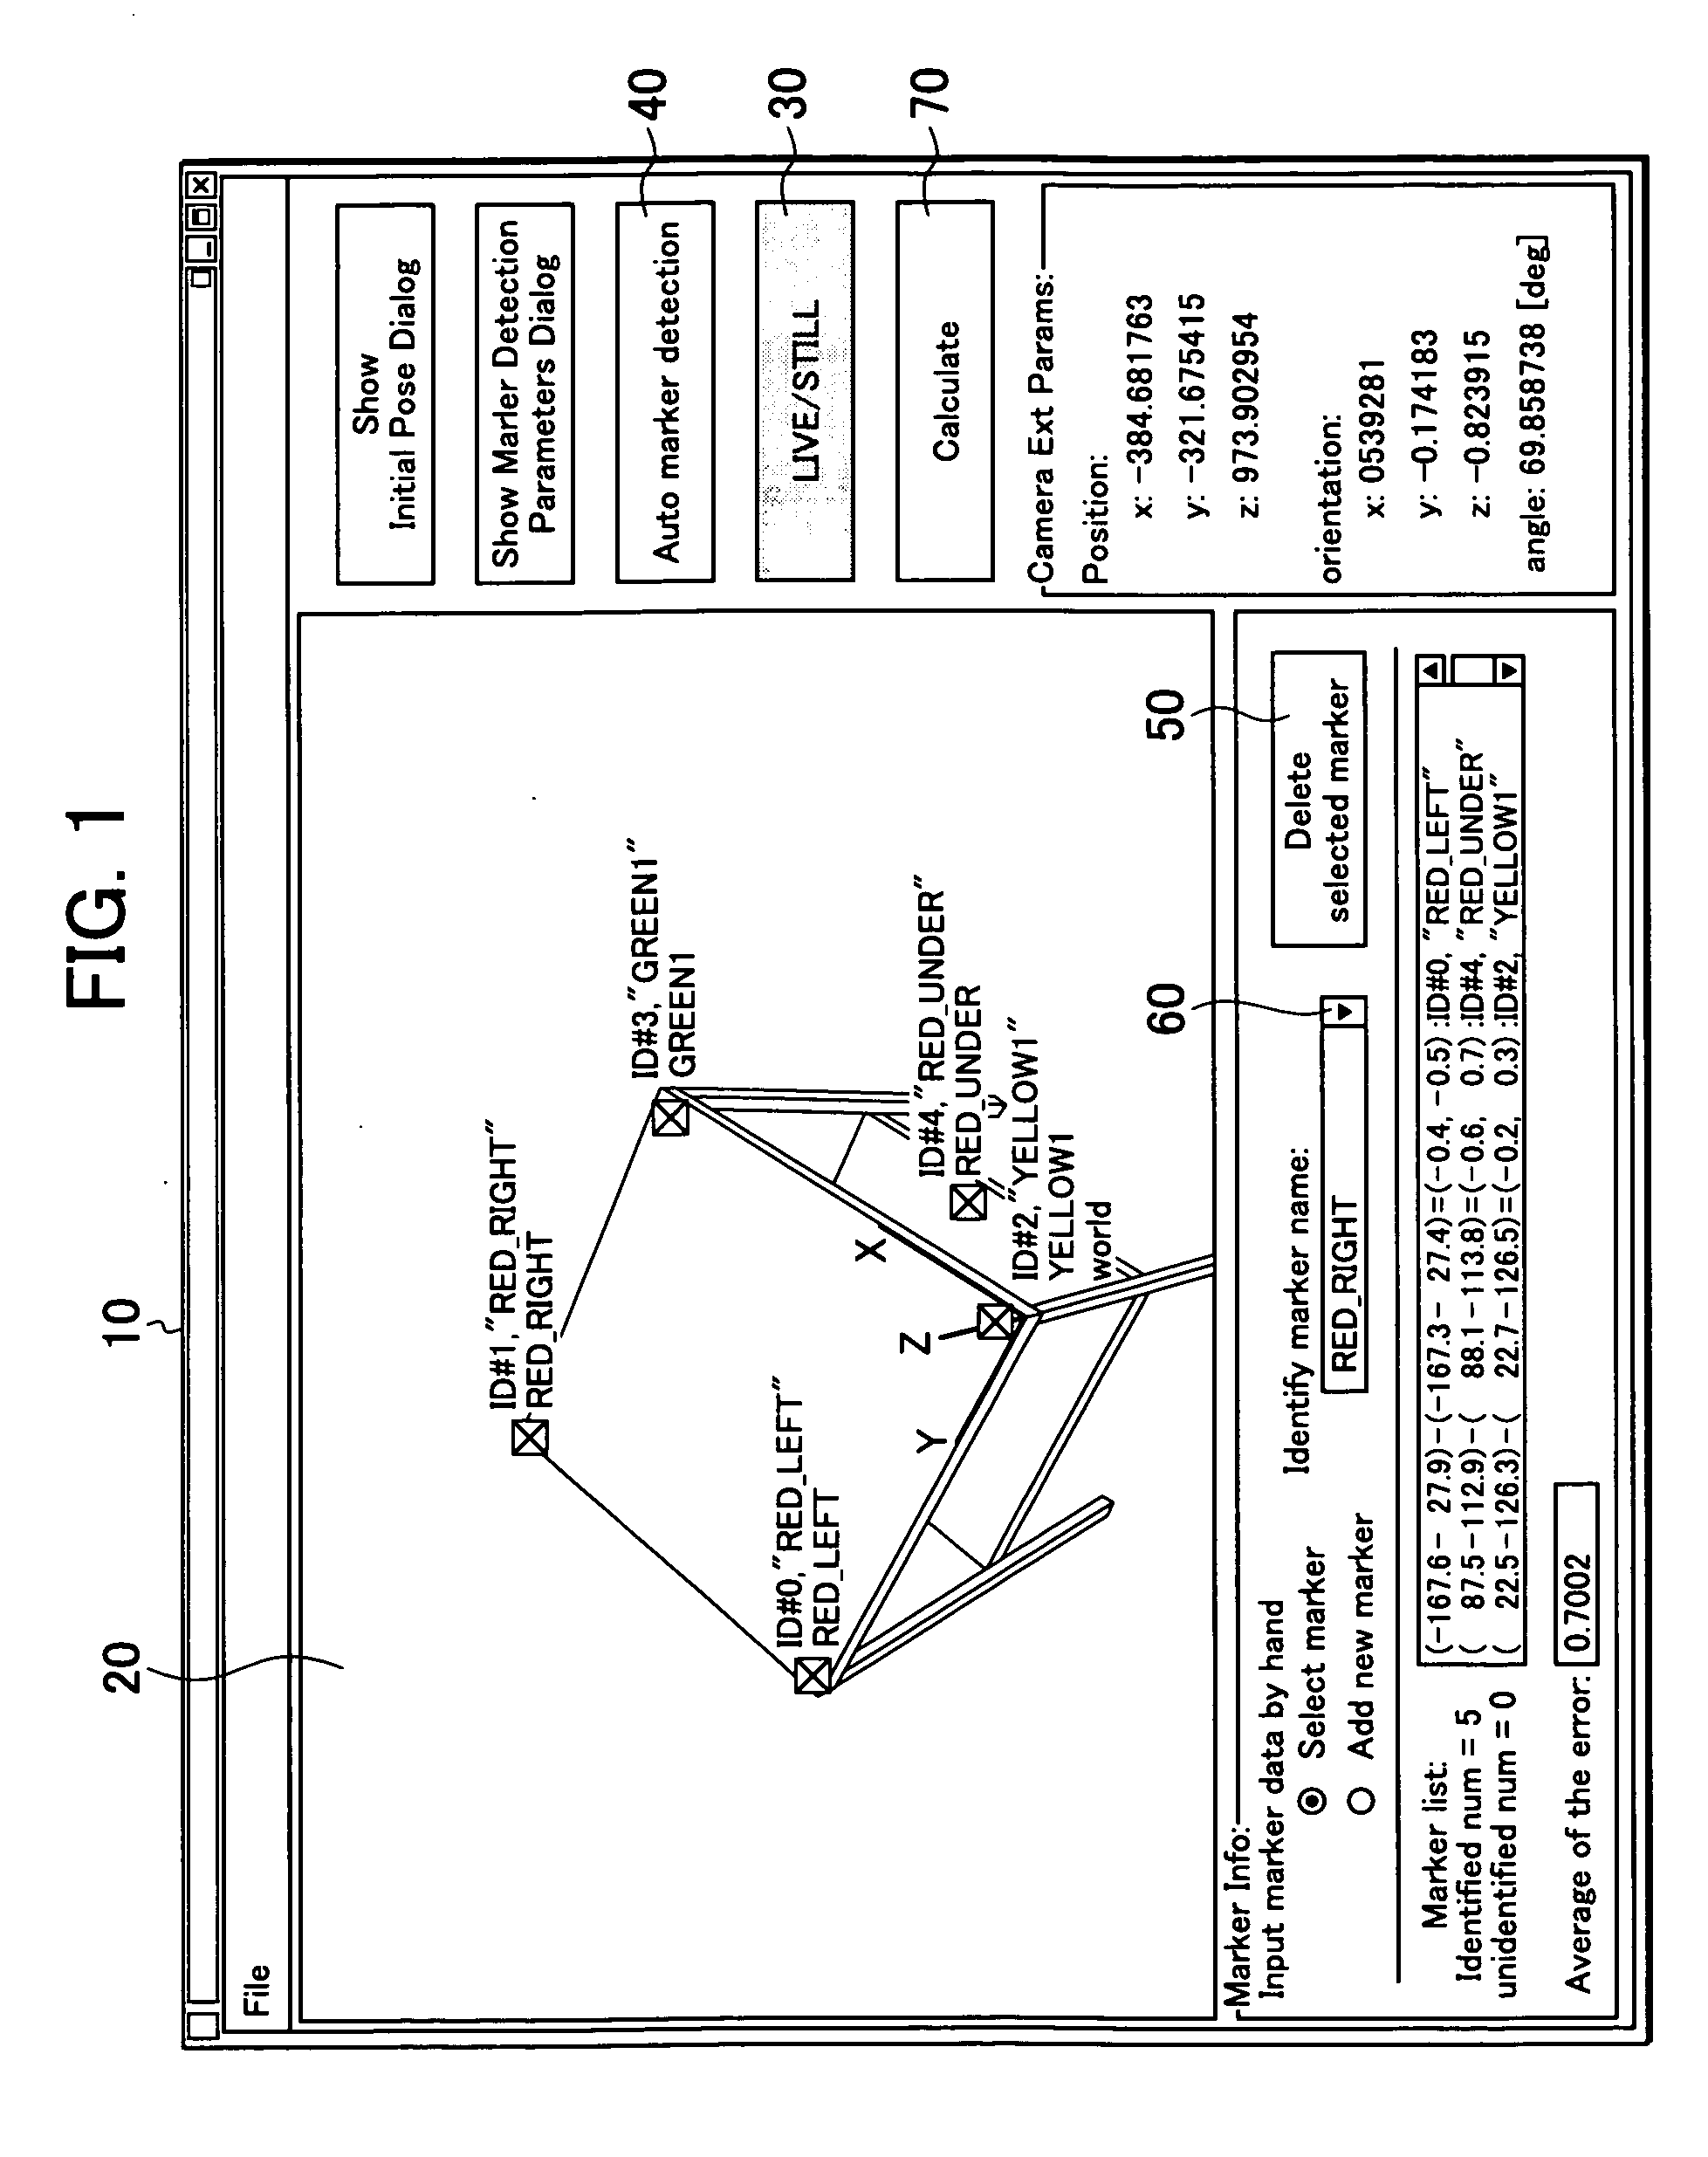 Image processing method and apparatus therefor